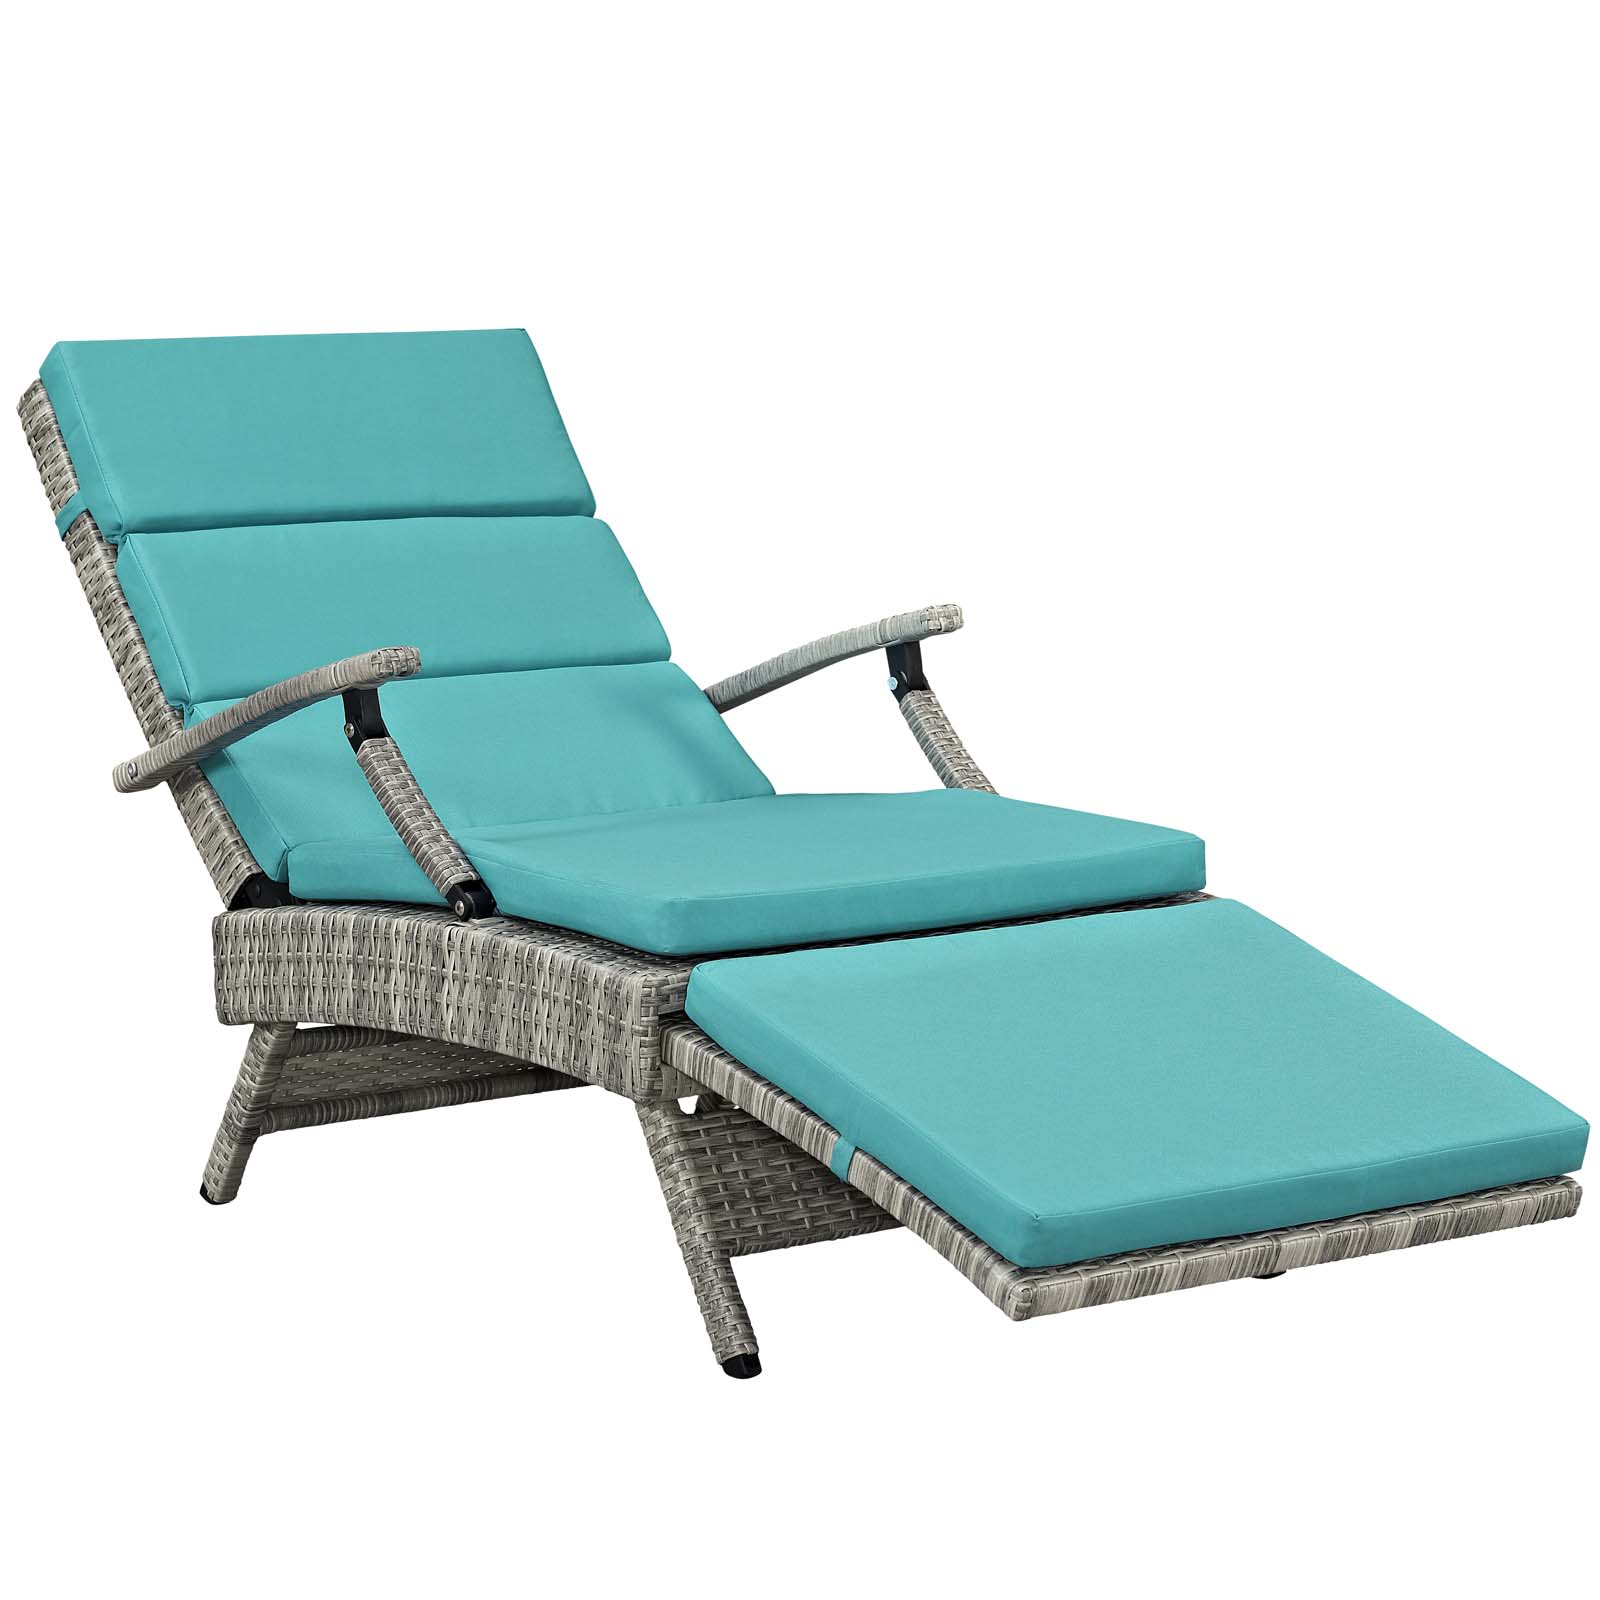 Modway Envisage Chaise Outdoor Patio Wicker Rattan Lounge Chair in Light Gray Turquoise - image 4 of 10